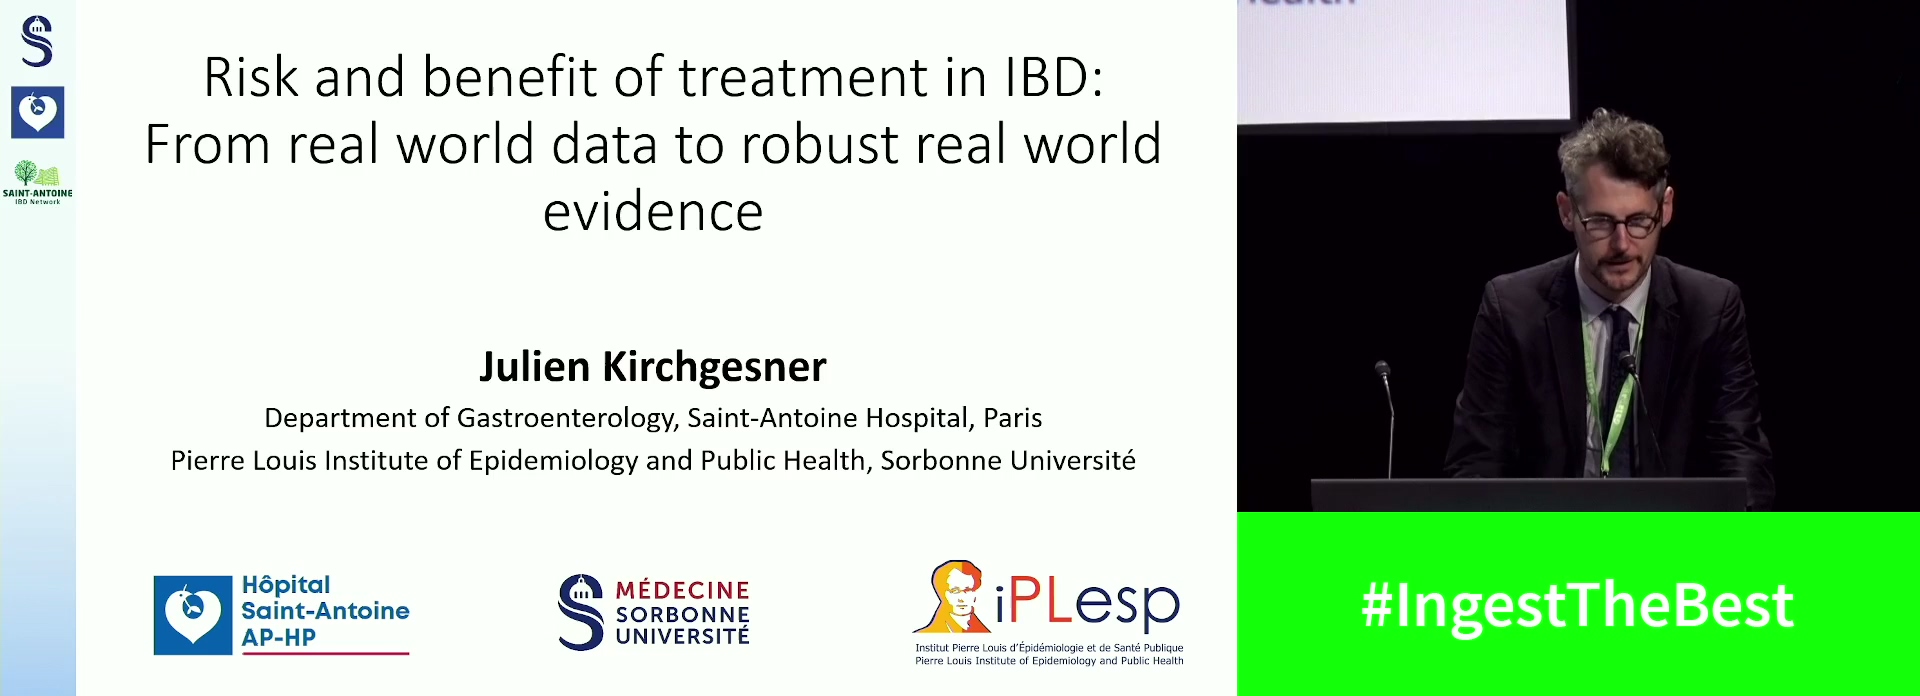 Rising Star: Risk and benefit of treatment in IBD: From real world data to robust real world evidence